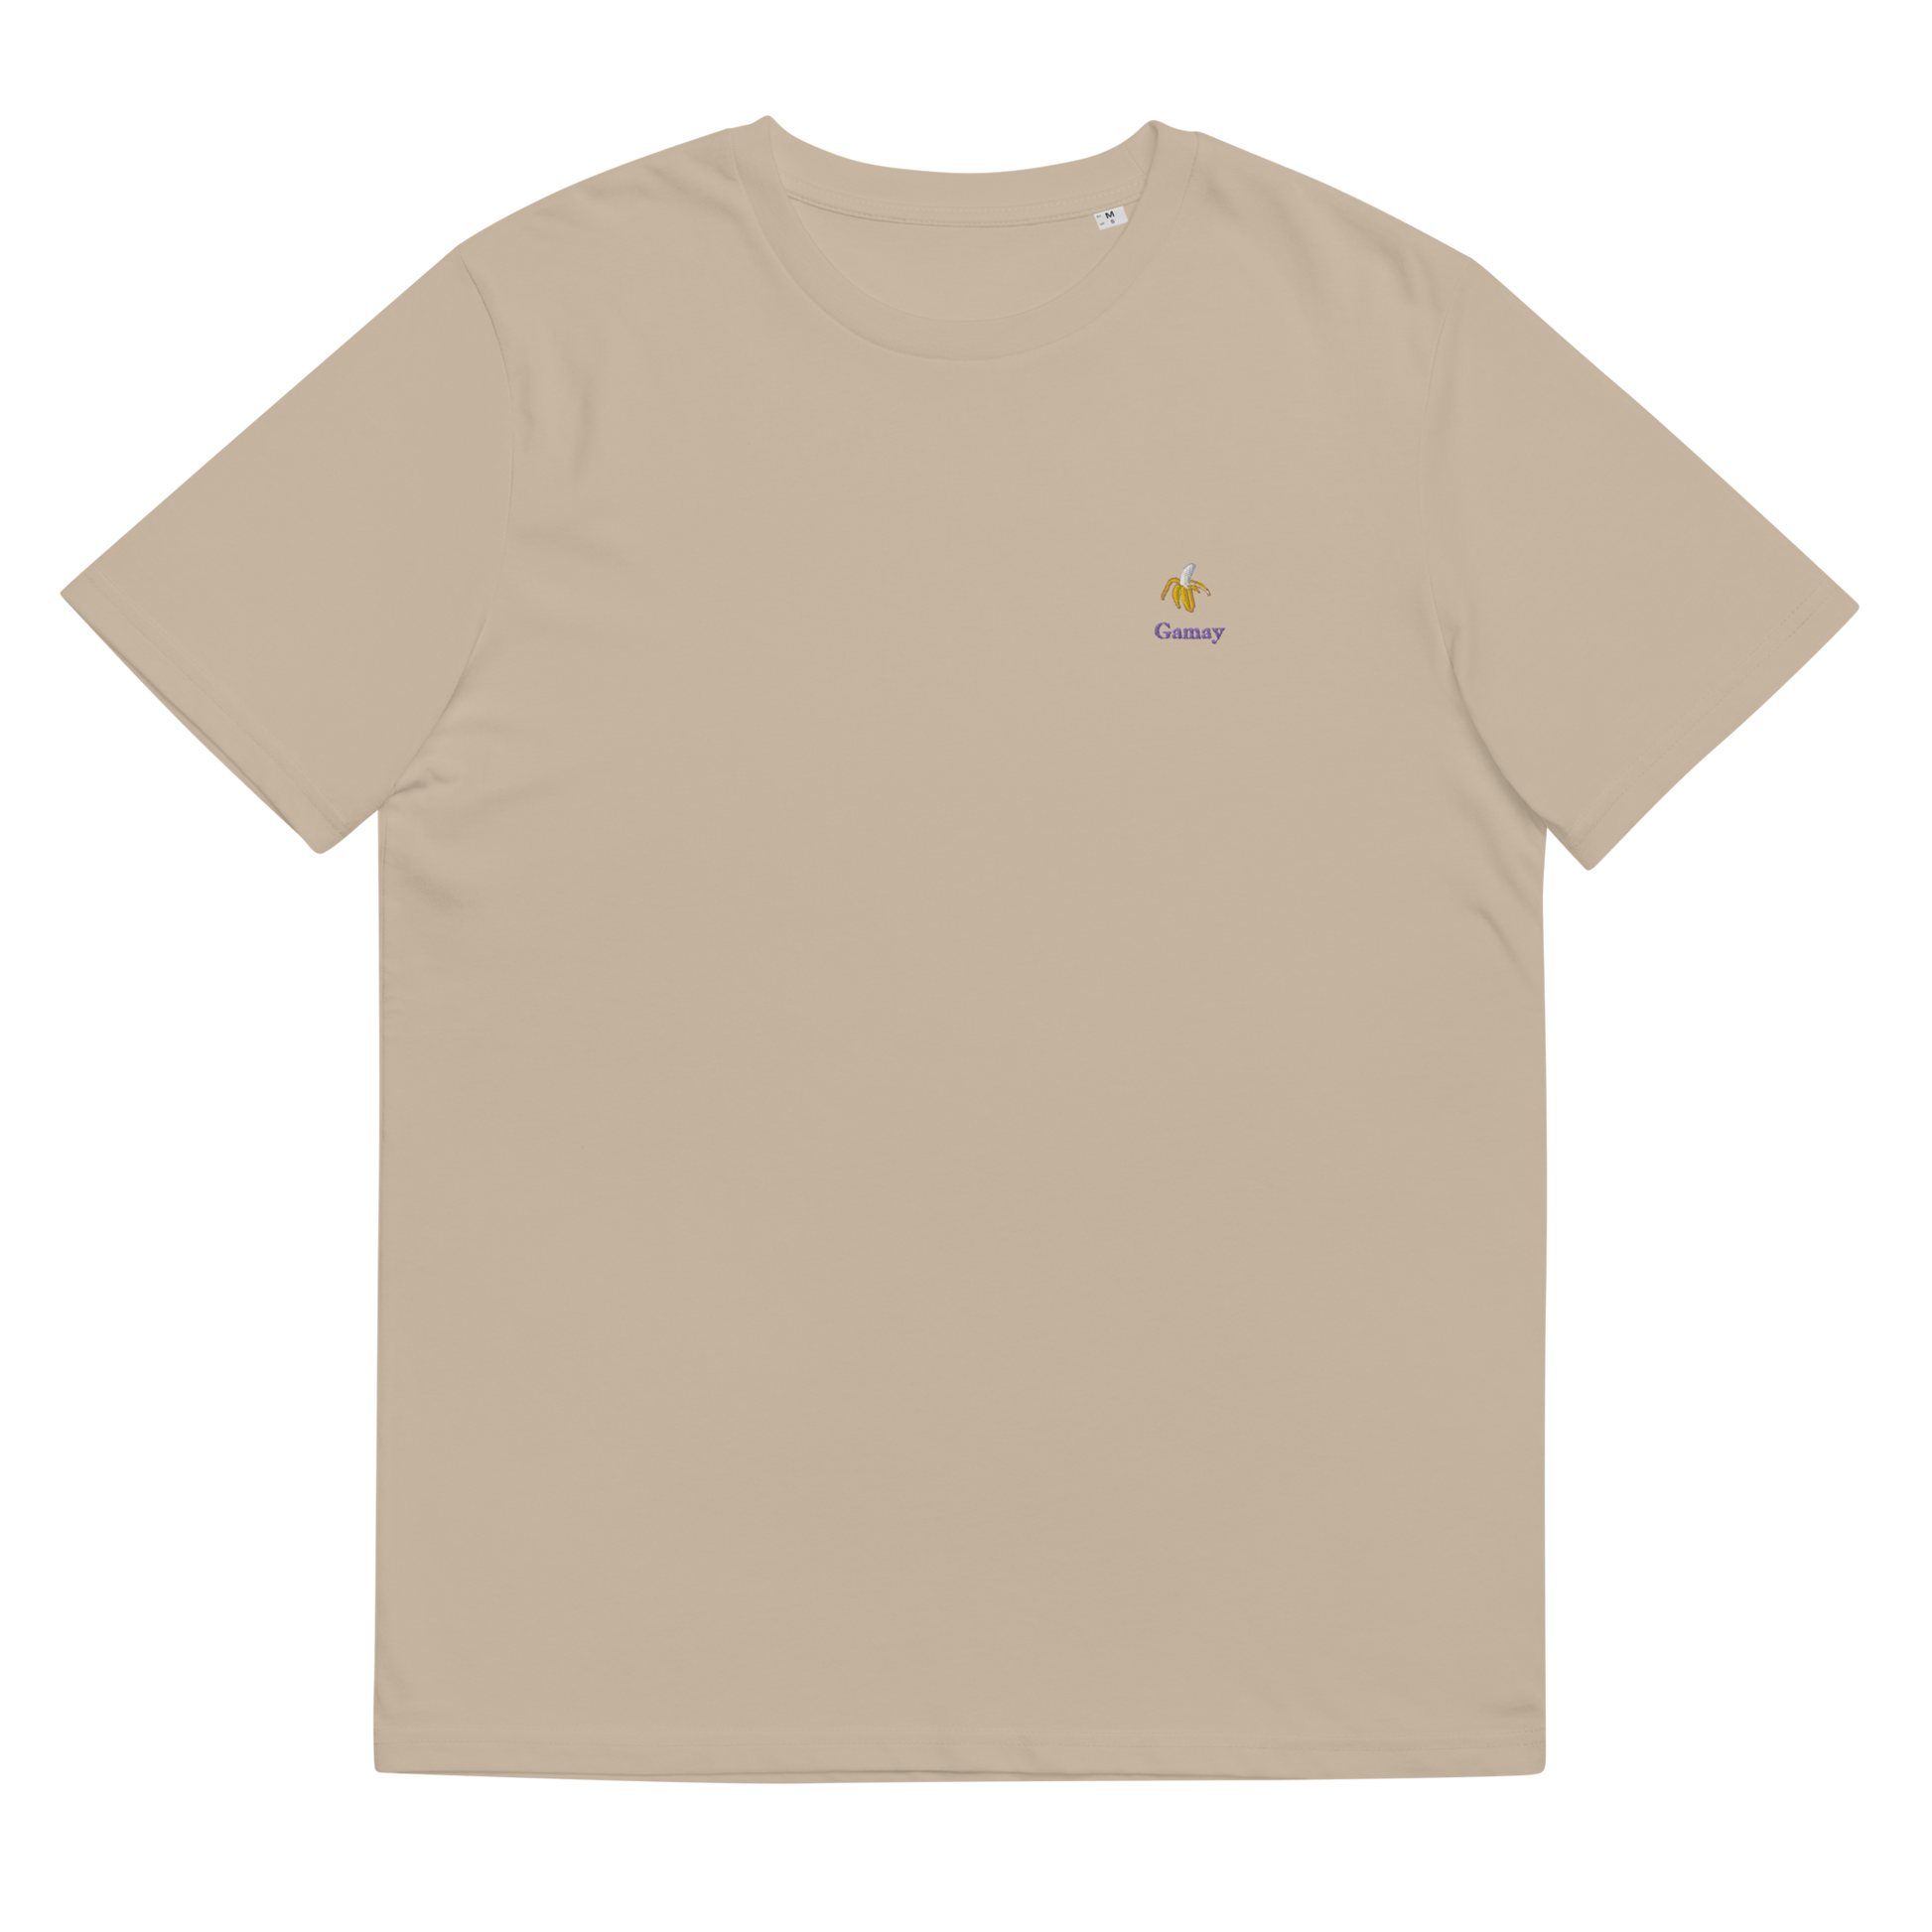 Gamay desert dust embroidered t-shirt